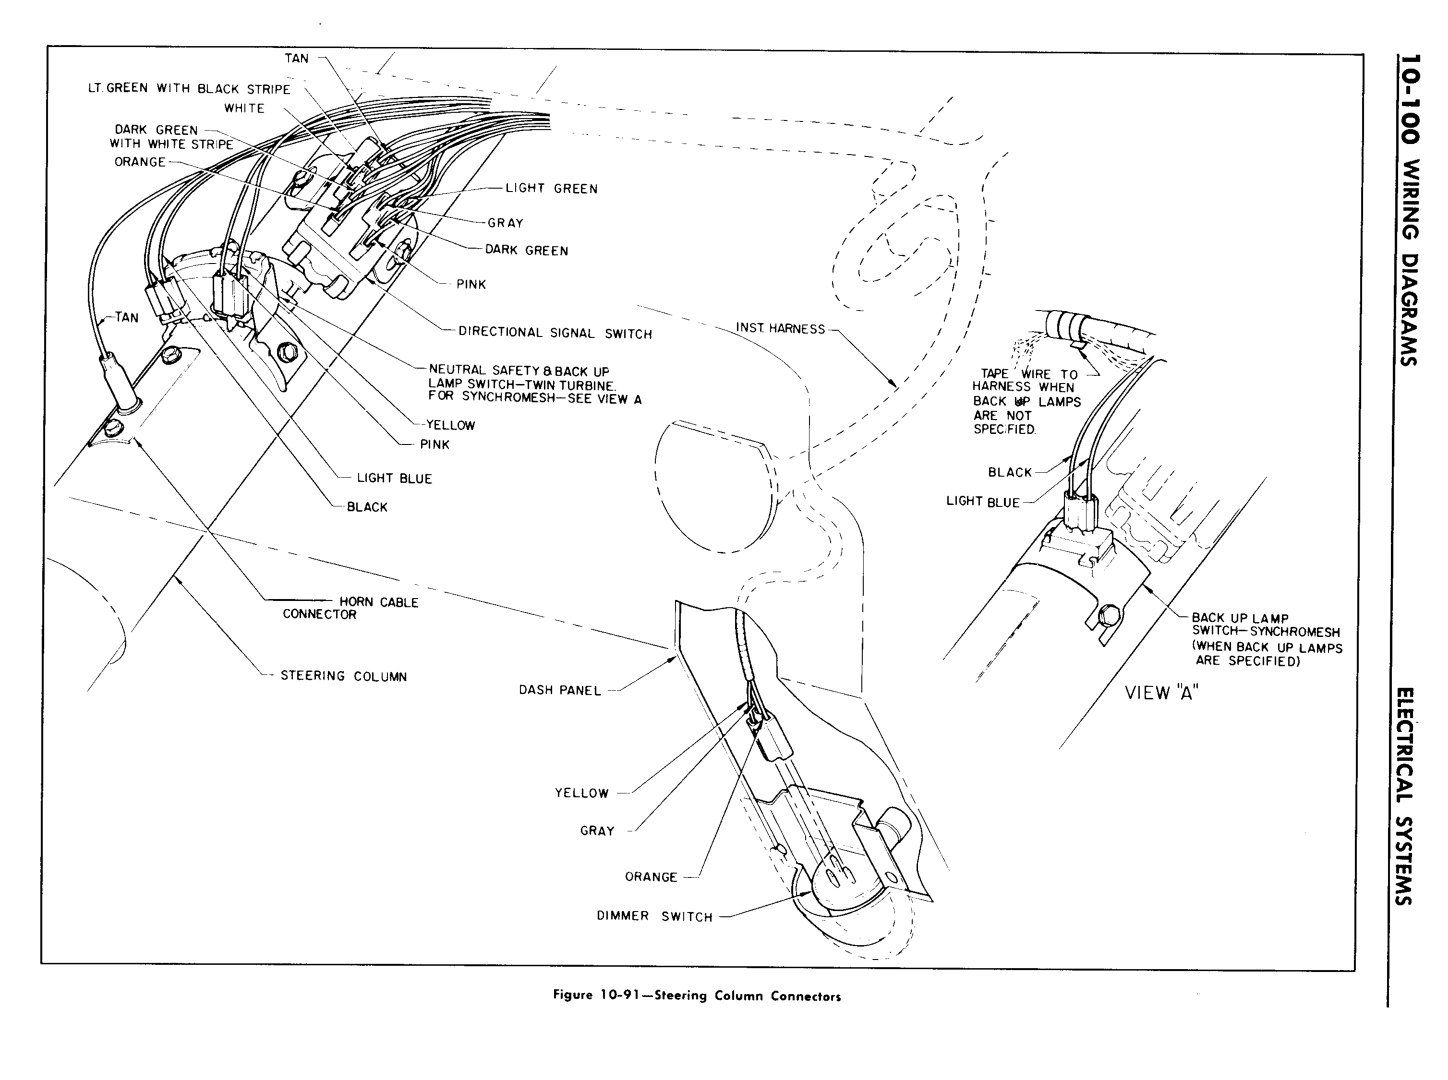 n_11 1960 Buick Shop Manual - Electrical Systems-100-100.jpg